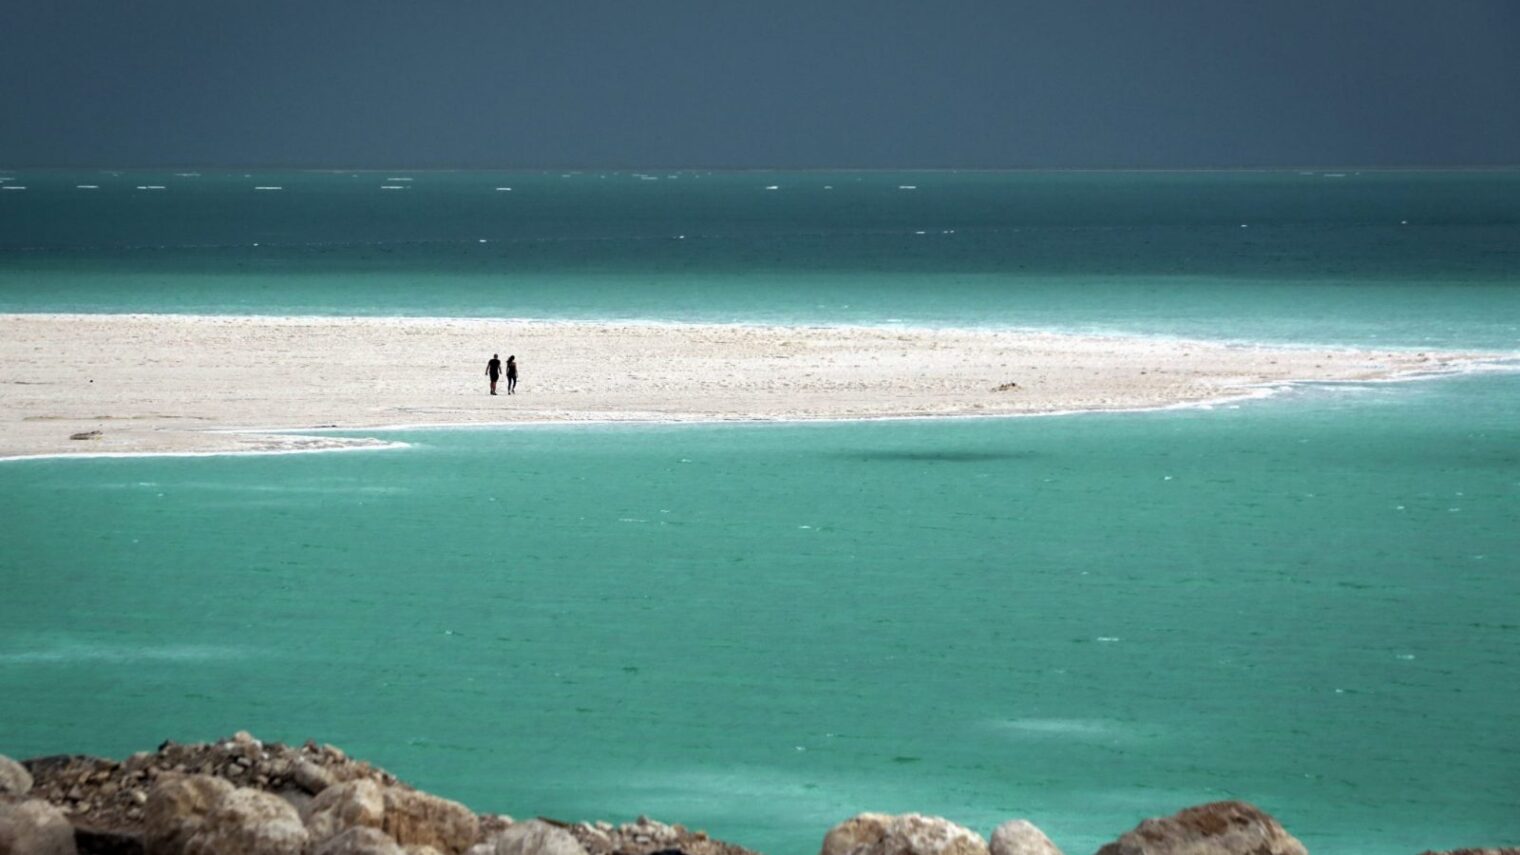 Because Israel is beautiful. A couple walk on a beach at the Dead Sea. Photo by Yossi Zamir/FLASH90